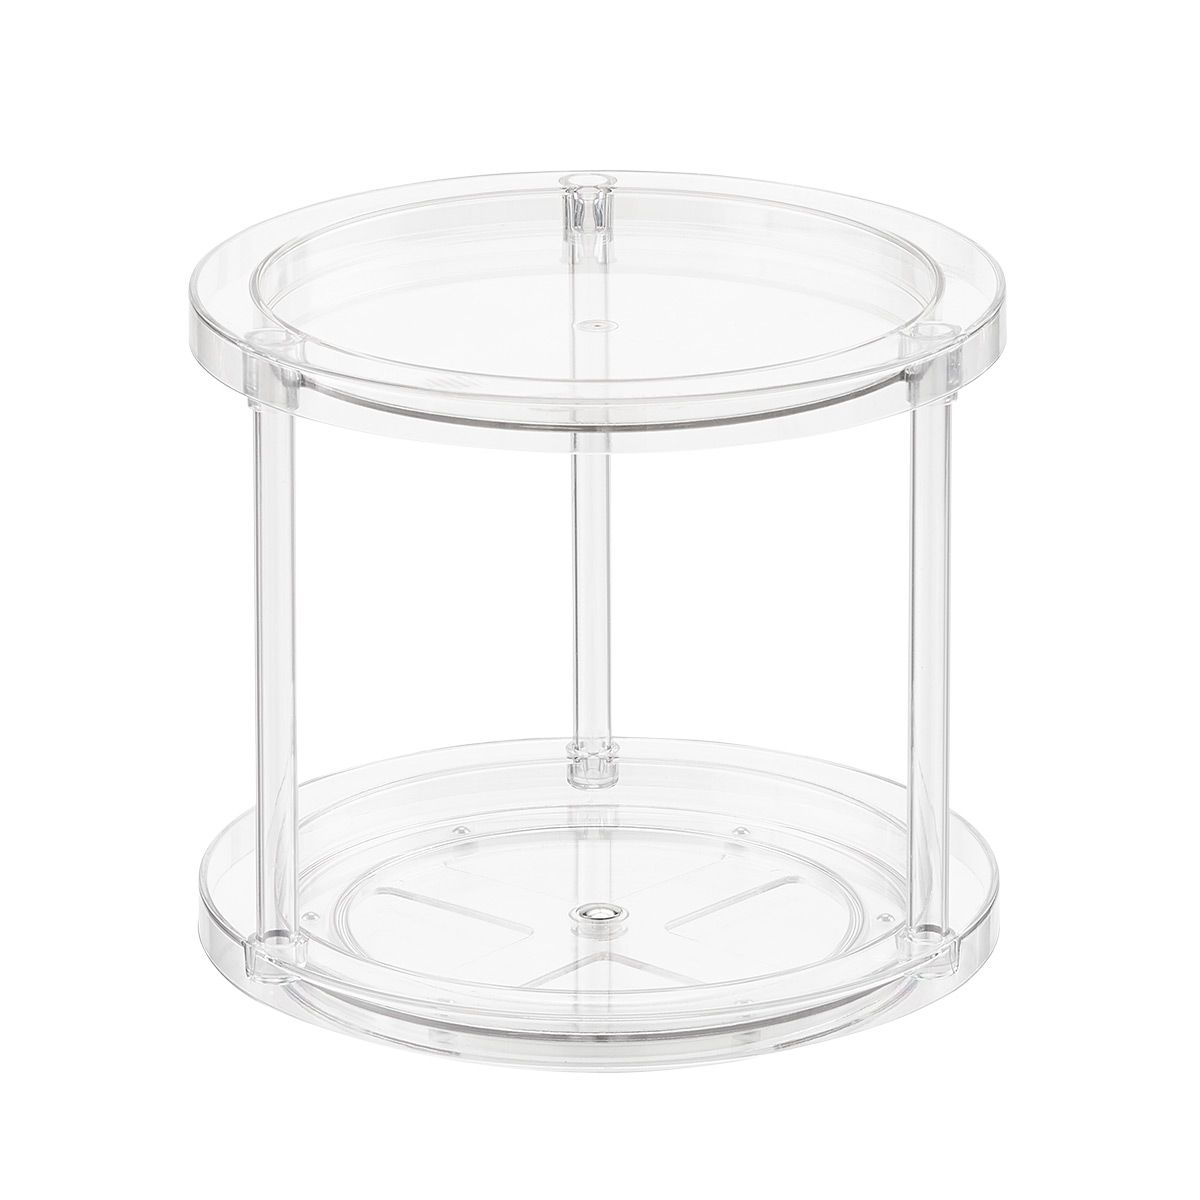 2-Tier Turntable | The Container Store